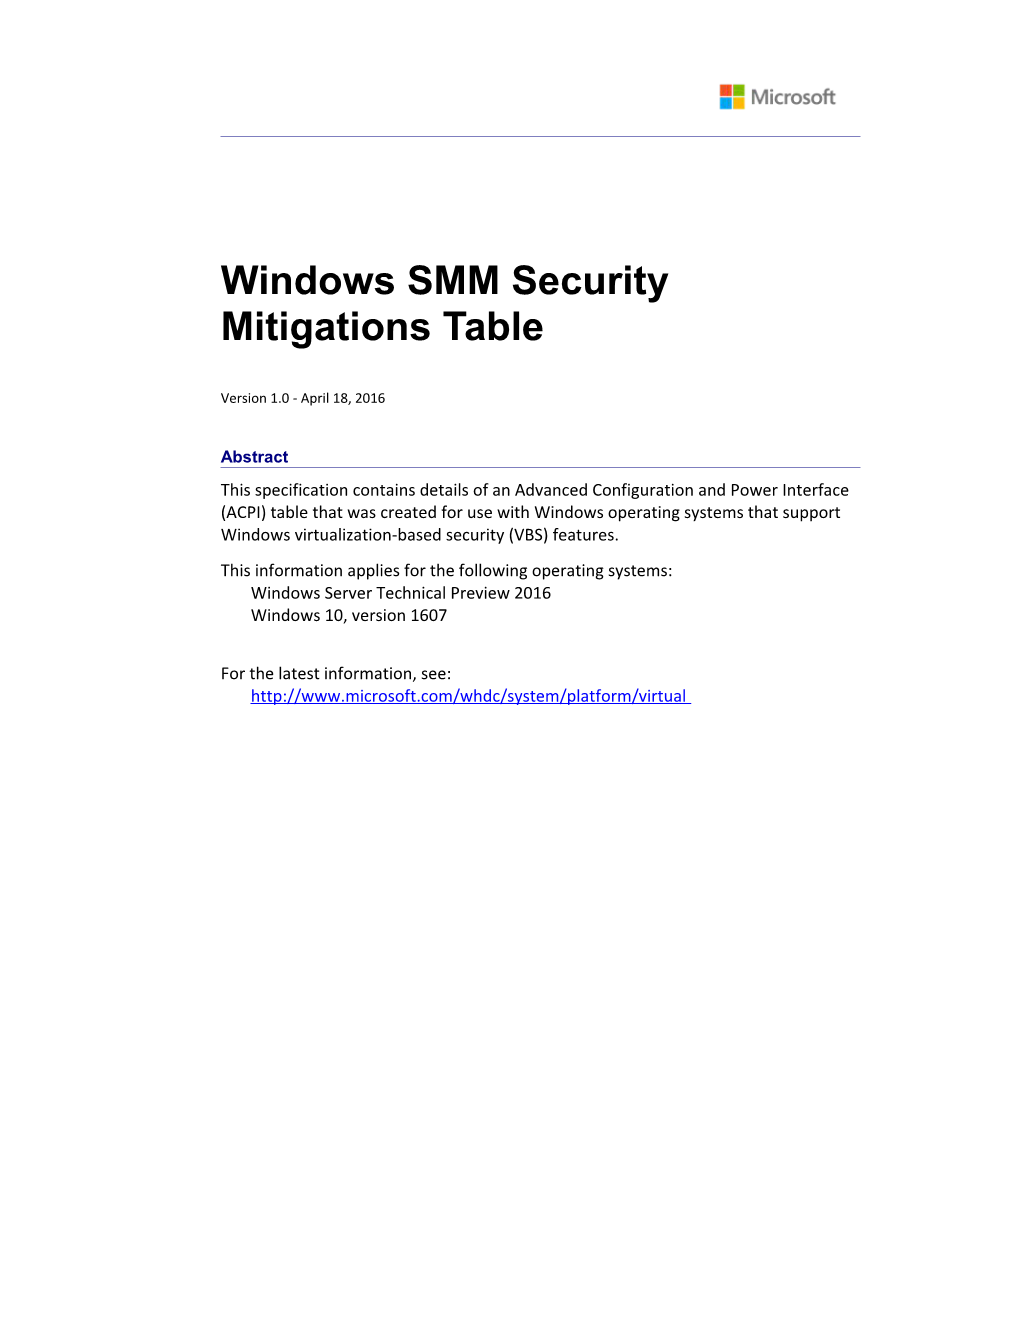 Windows SMM Security Mitigations Table